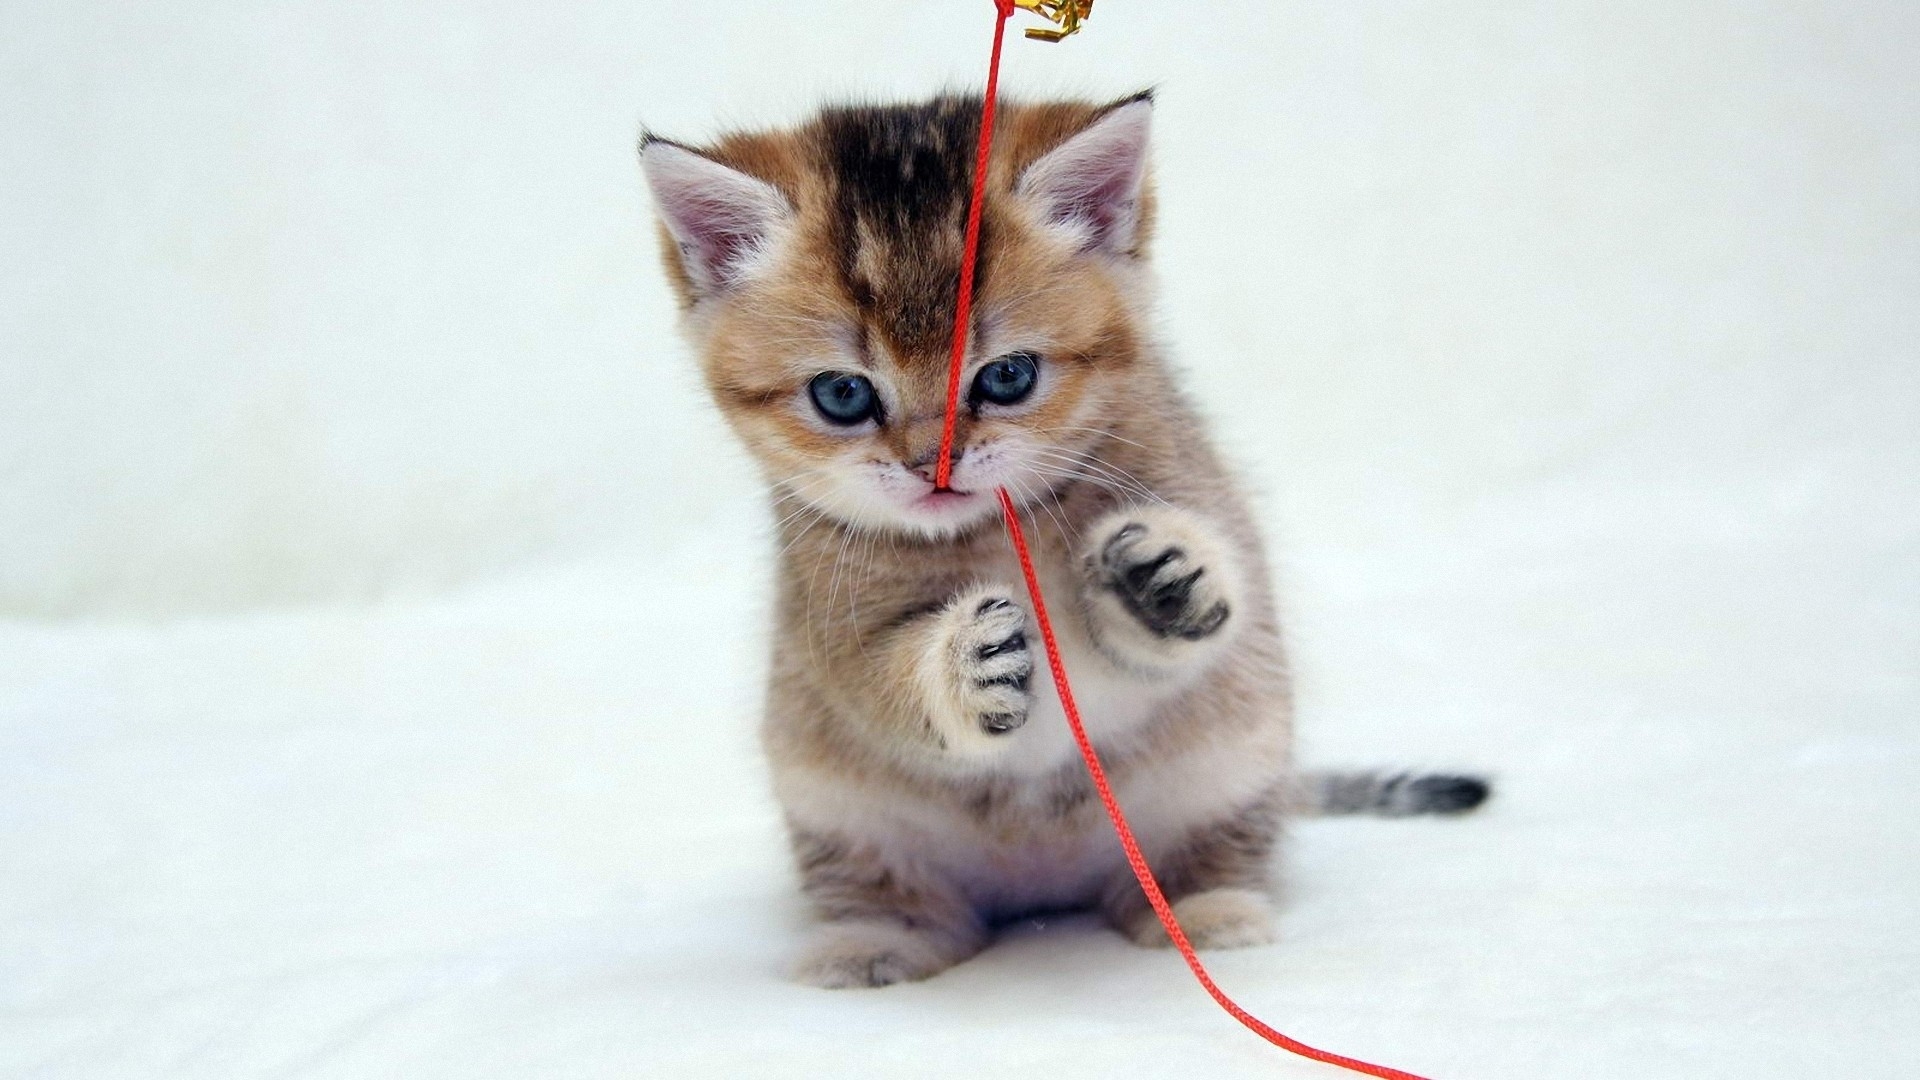 Free photo A kitten playing with a red string.